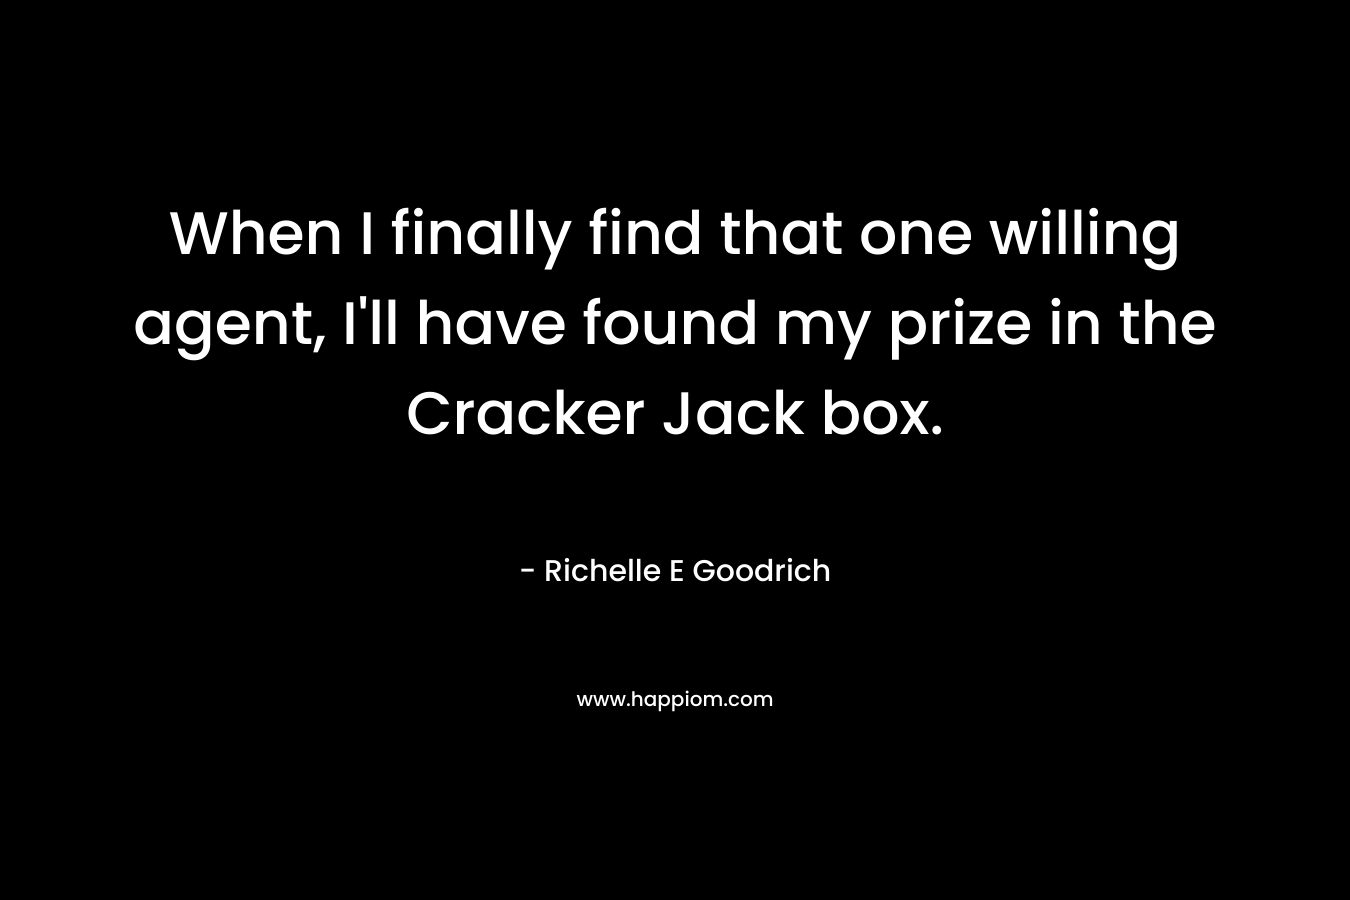 When I finally find that one willing agent, I’ll have found my prize in the Cracker Jack box. – Richelle E Goodrich